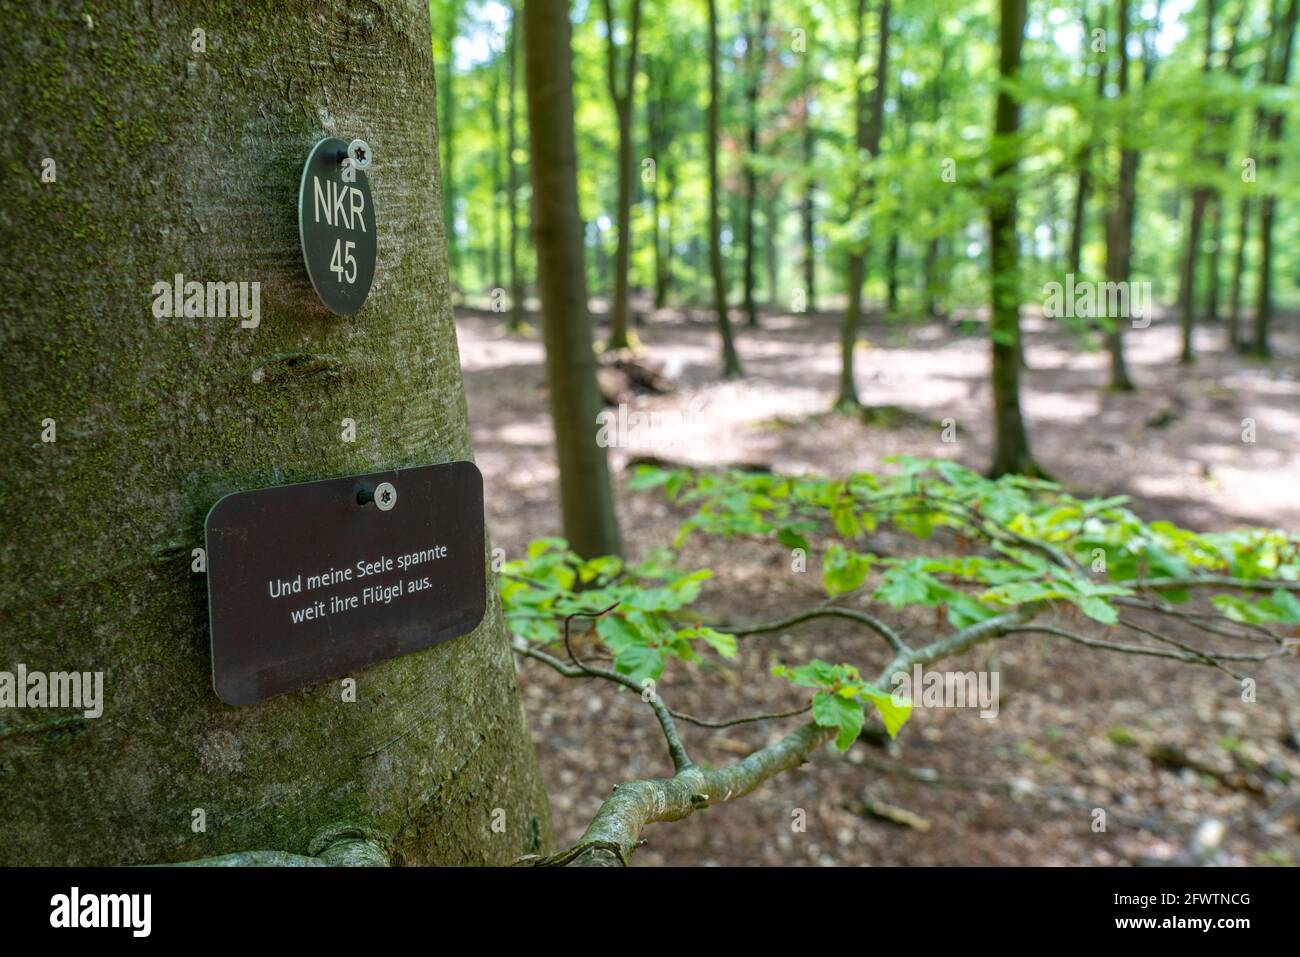 Cemetery forest, burial place in the forest, in biodegradable urns, under trees, Niederkrüchten, NRW, Germany, Stock Photo